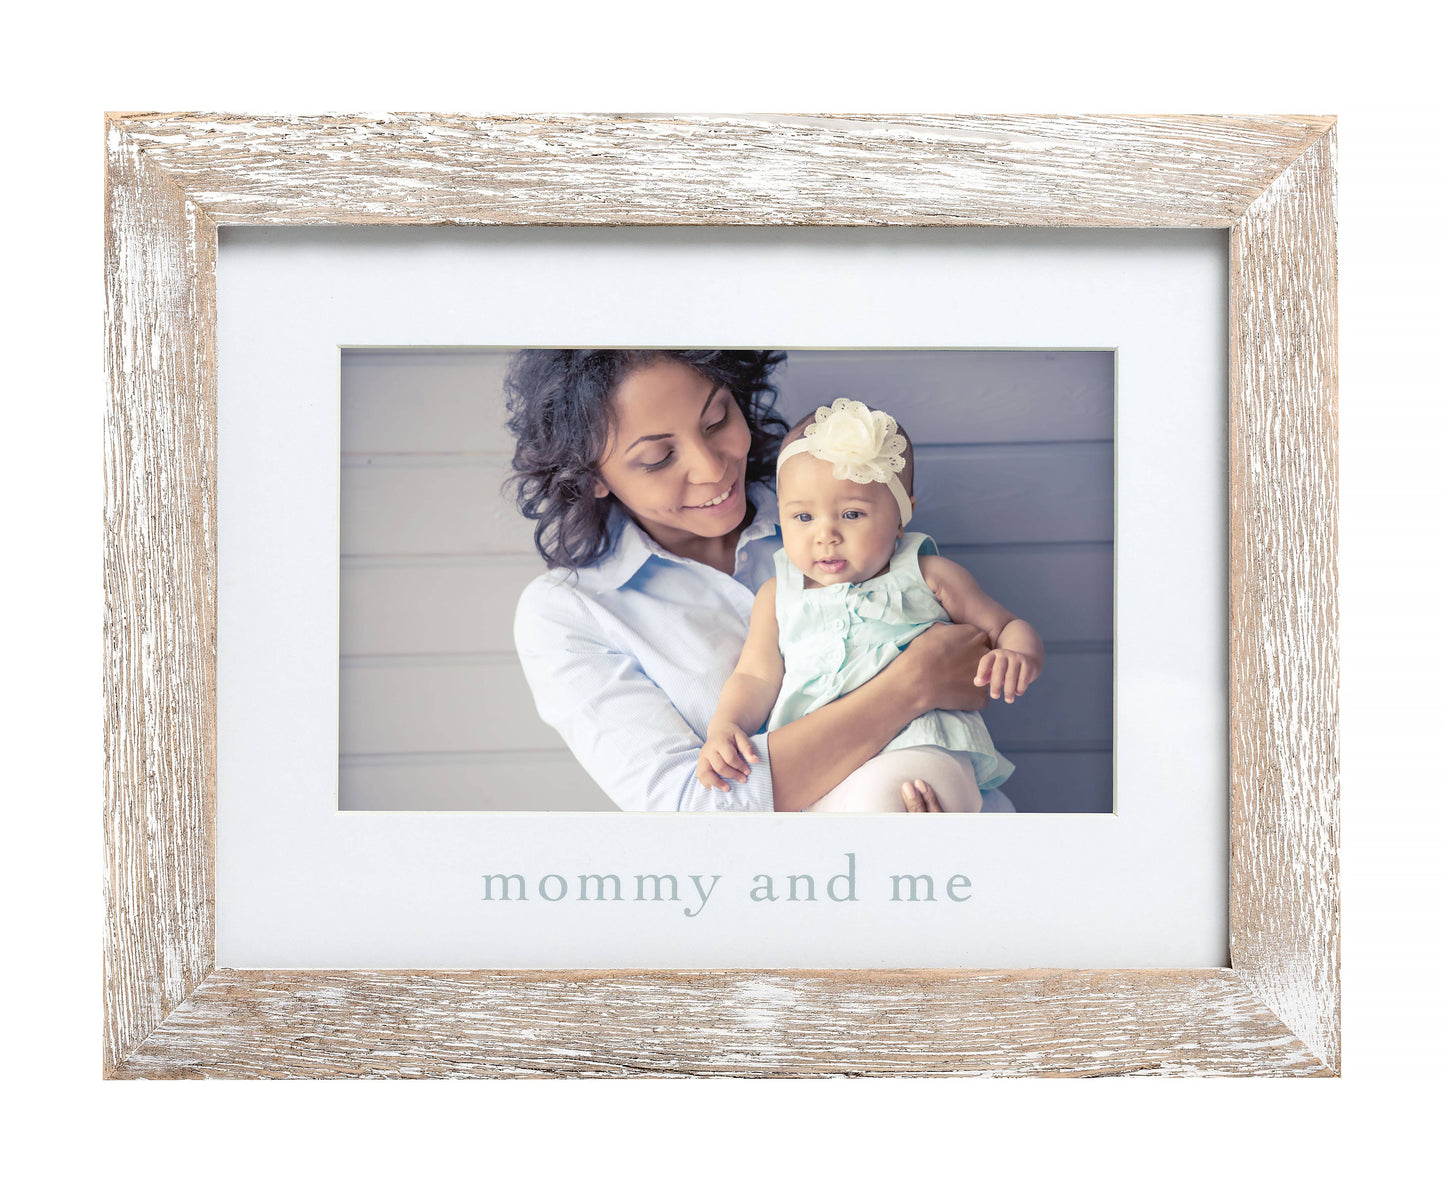 Mommy and Me Rustic Picture Frame